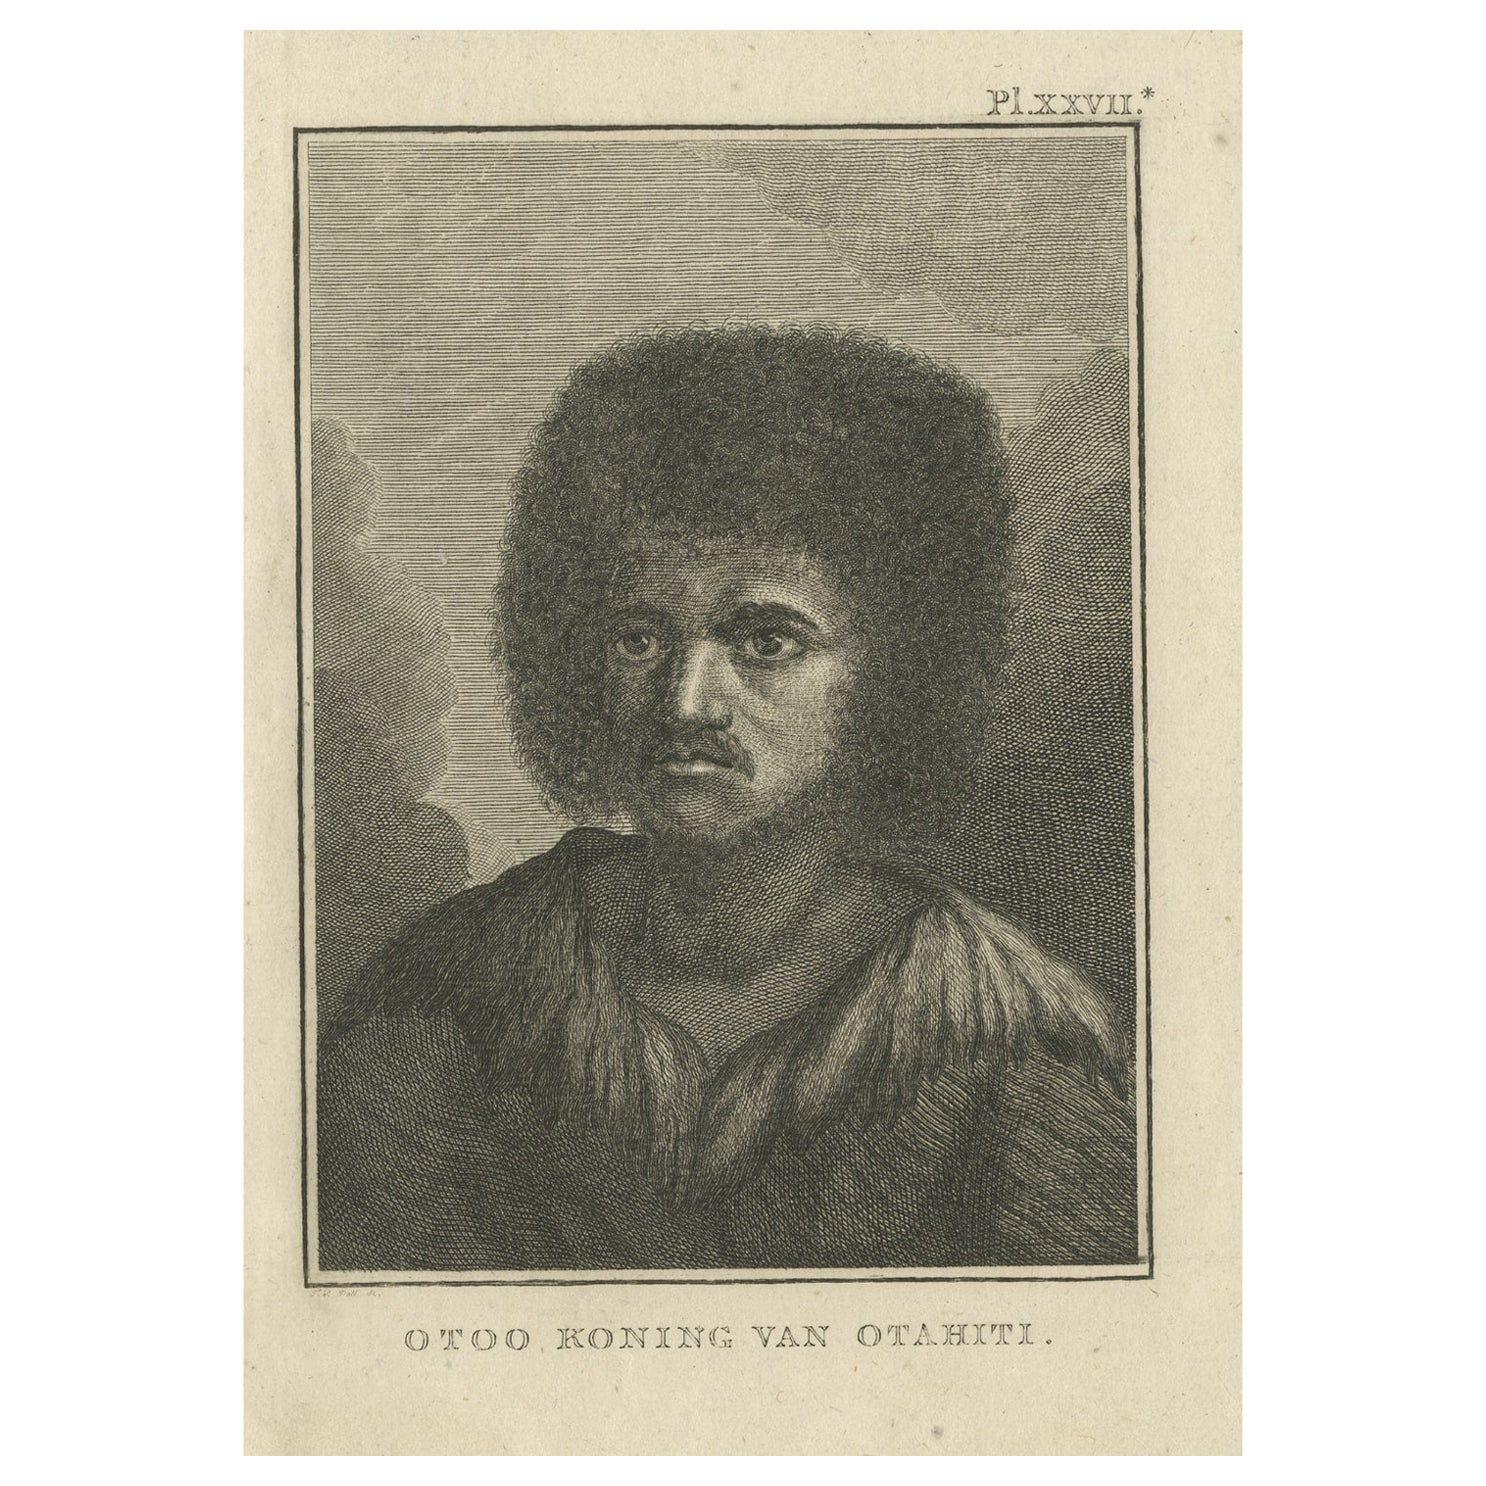 Original Antique Engraving of Otoo, King of Tahiti, by Cook, 1803